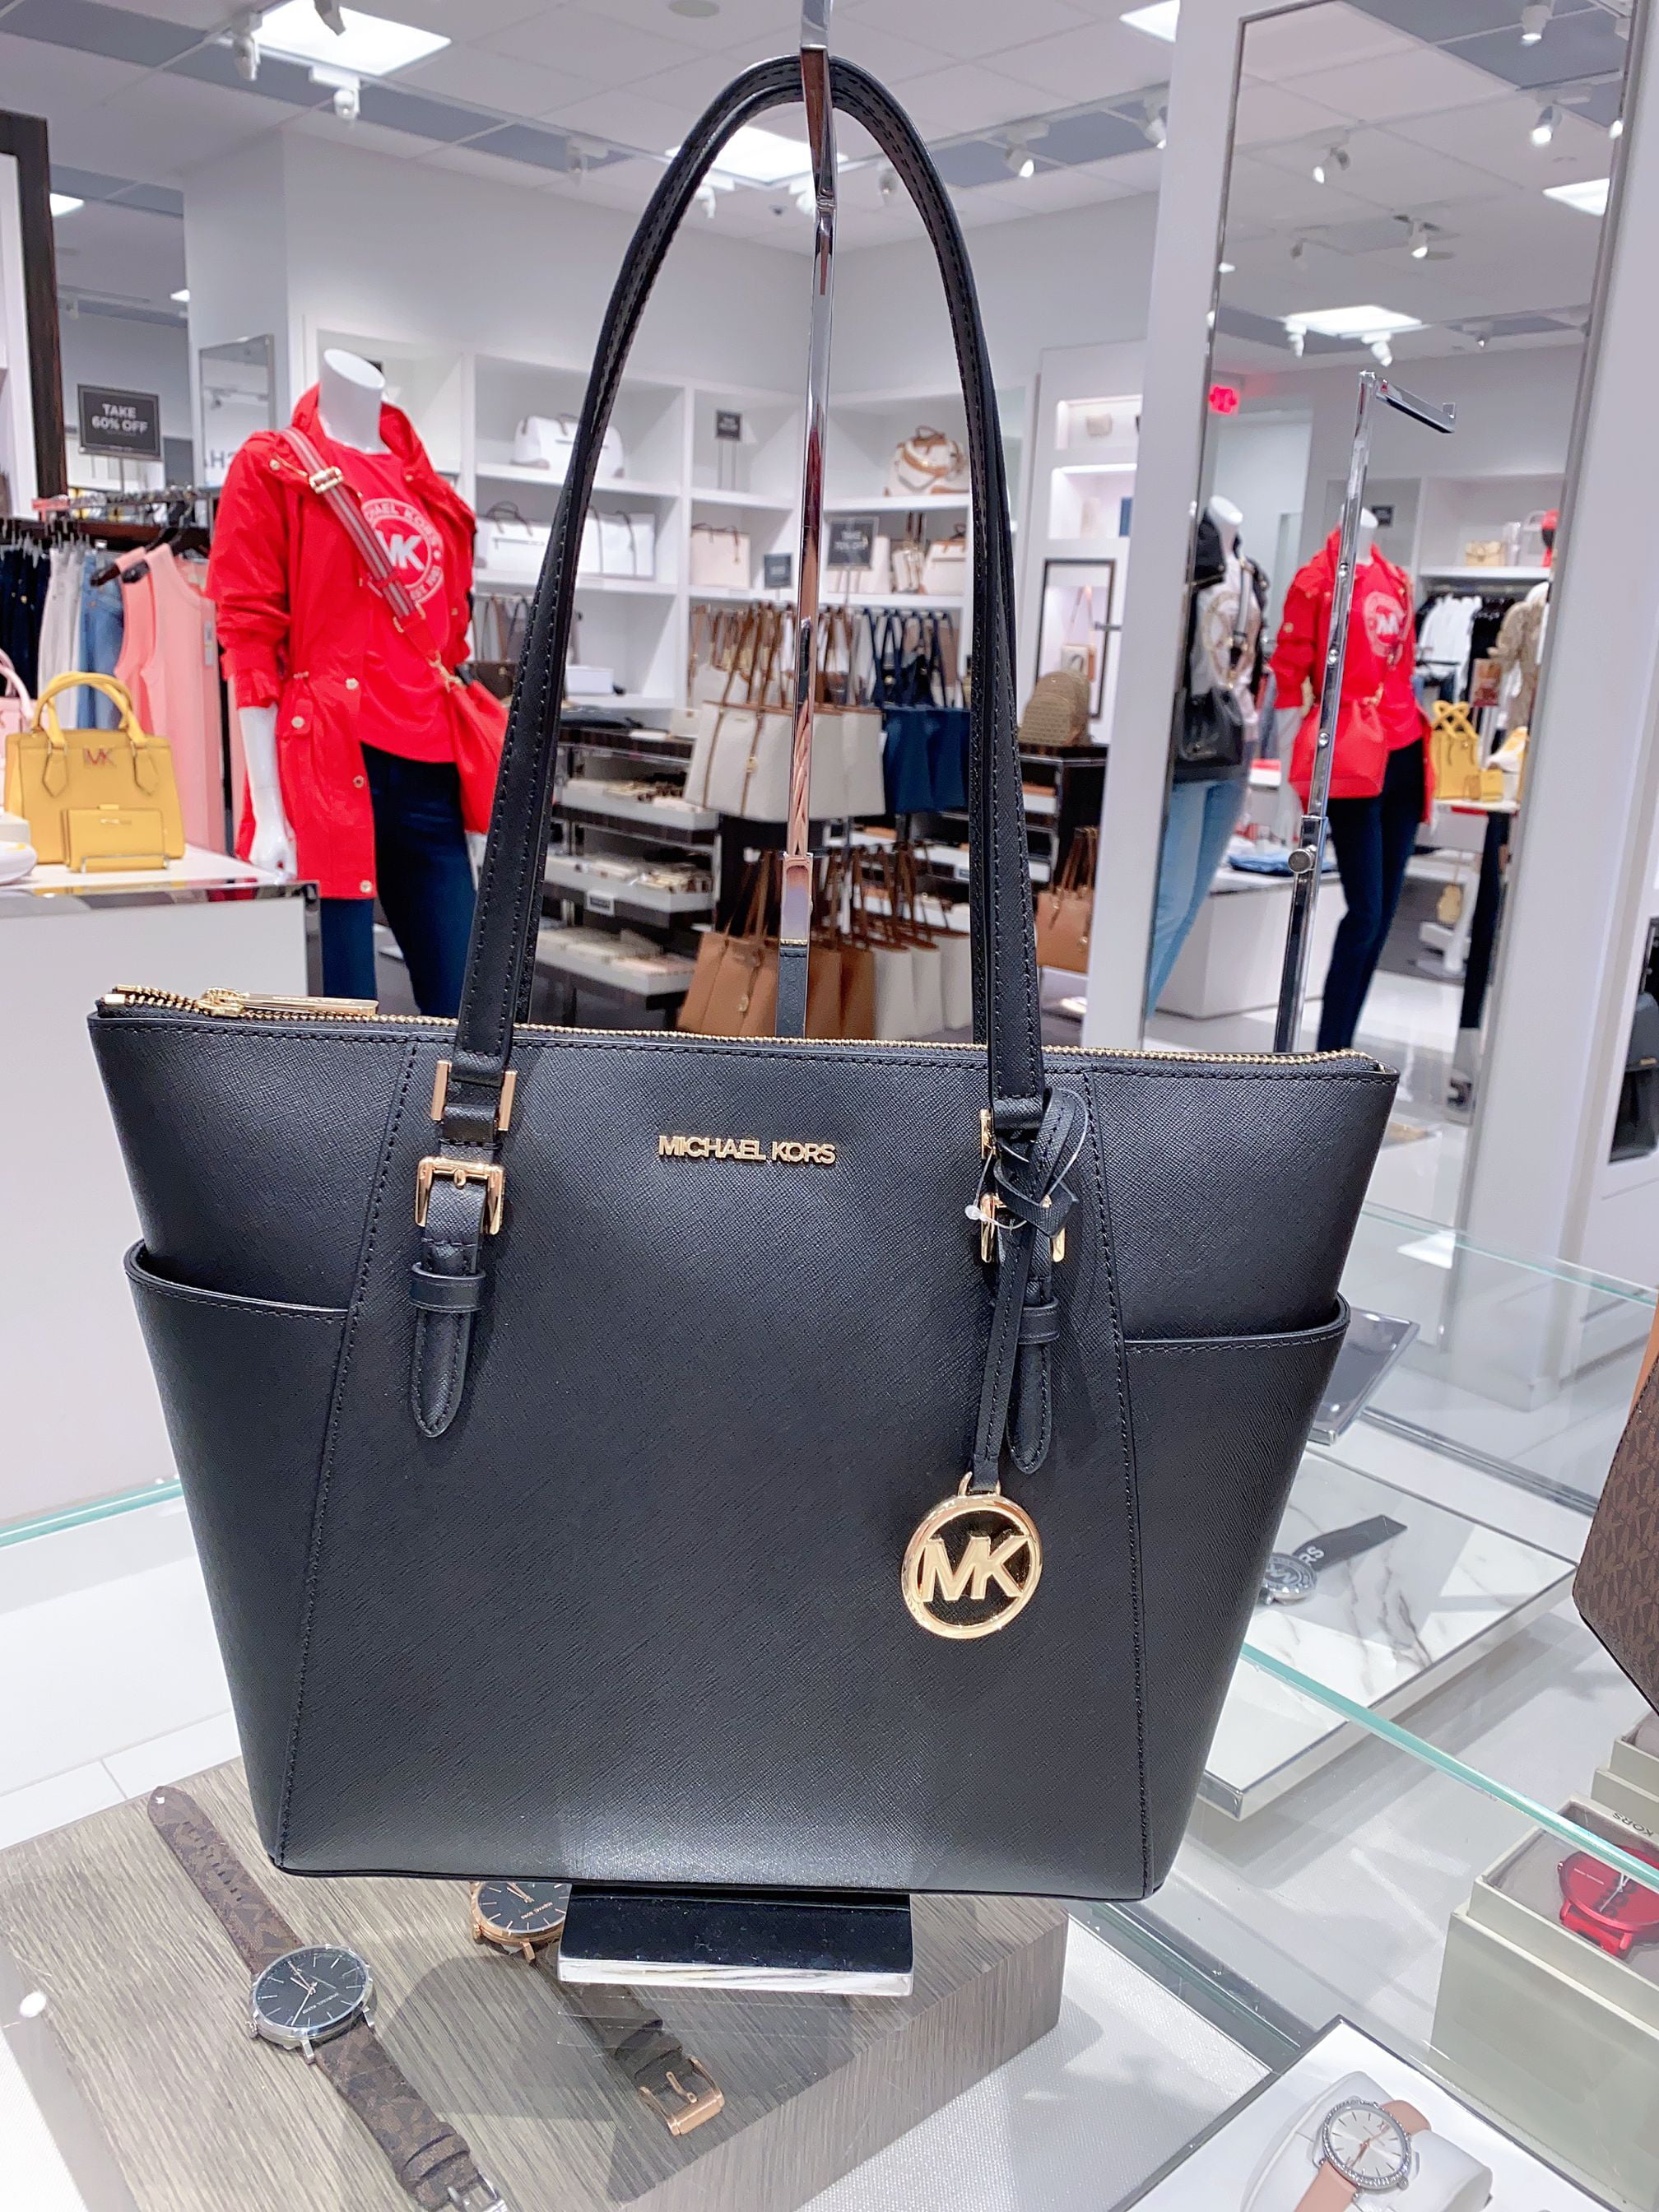 Michael kors non leather bags